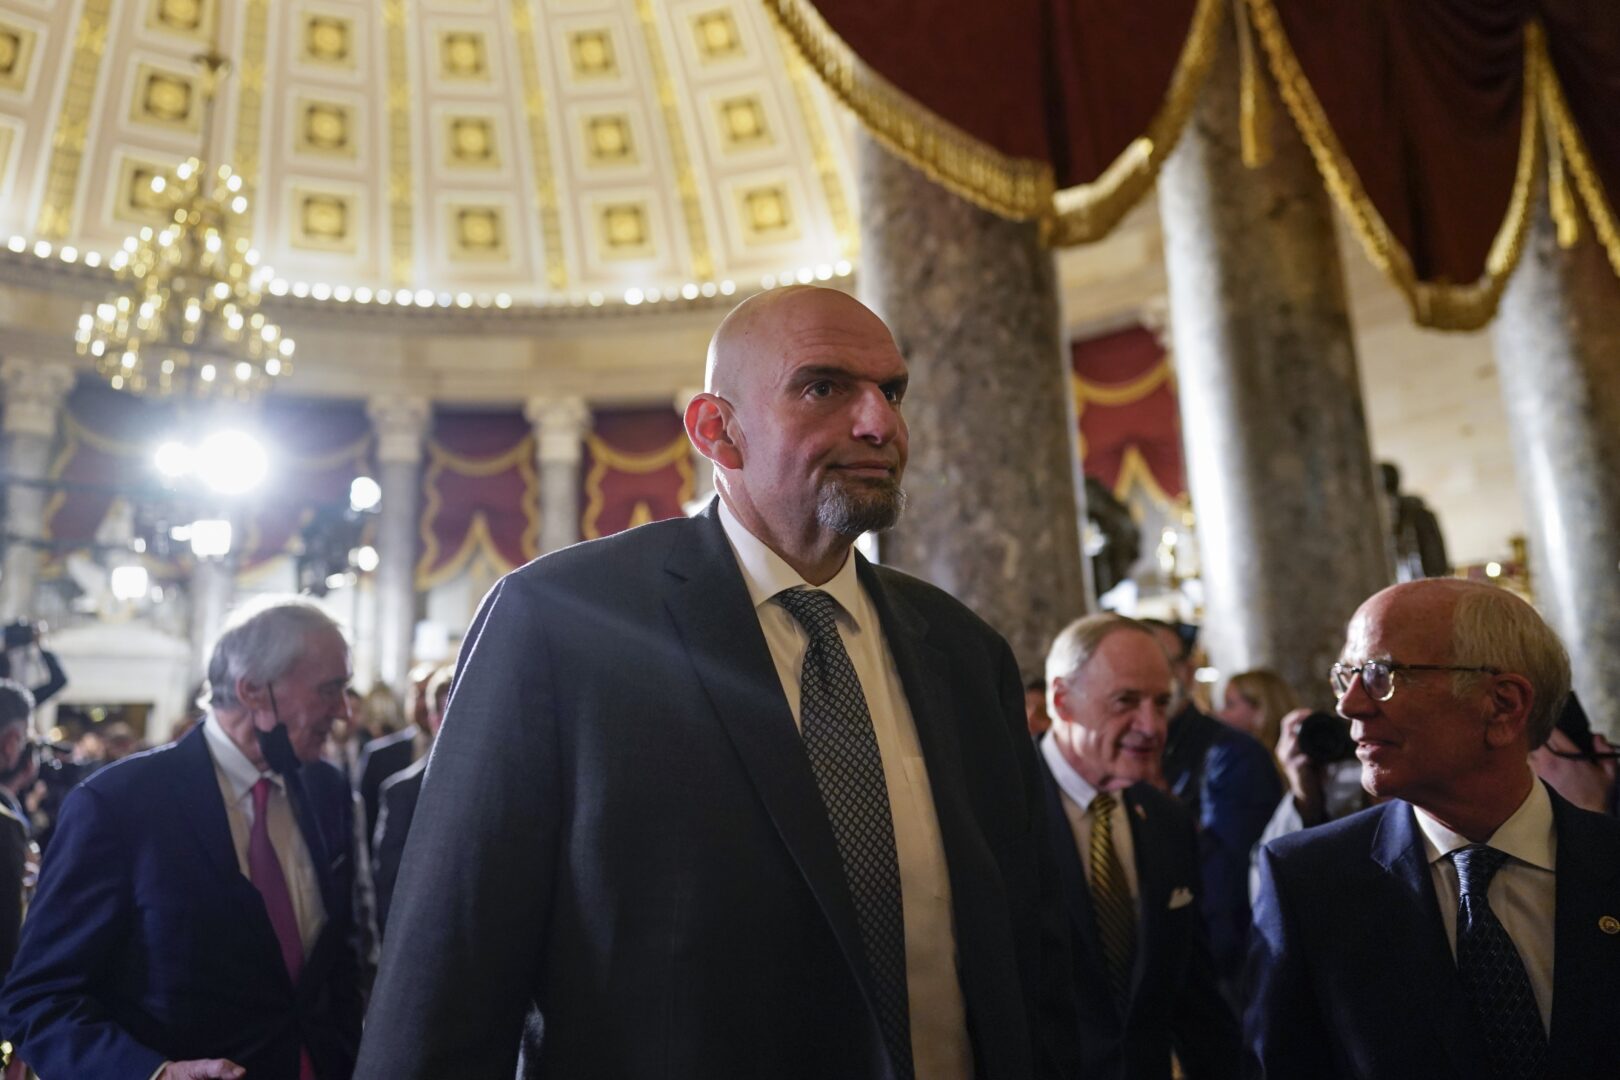 Sen. John Fetterman, D-Pa., arrives for President Joe Biden's State of the Union address to a joint session of Congress at the Capitol, Tuesday, Feb. 7, 2023, in Washington. (